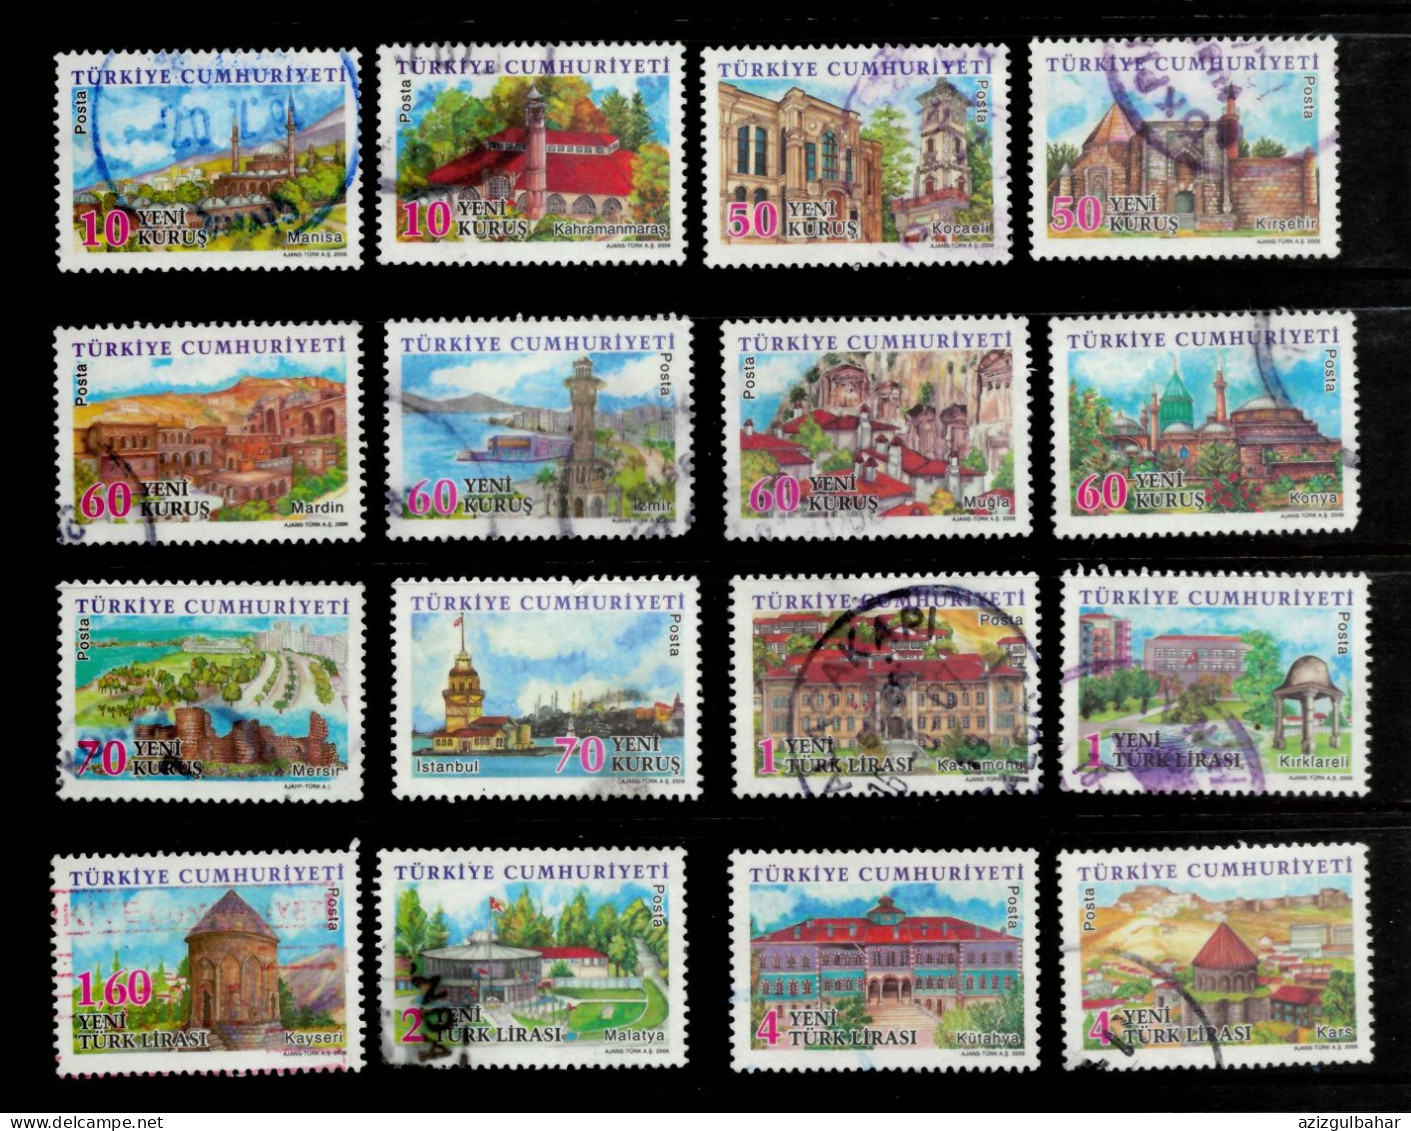 TURKEY -   2006 - PROVINCES 02- GOOD USED SET AS SEEN - Used Stamps